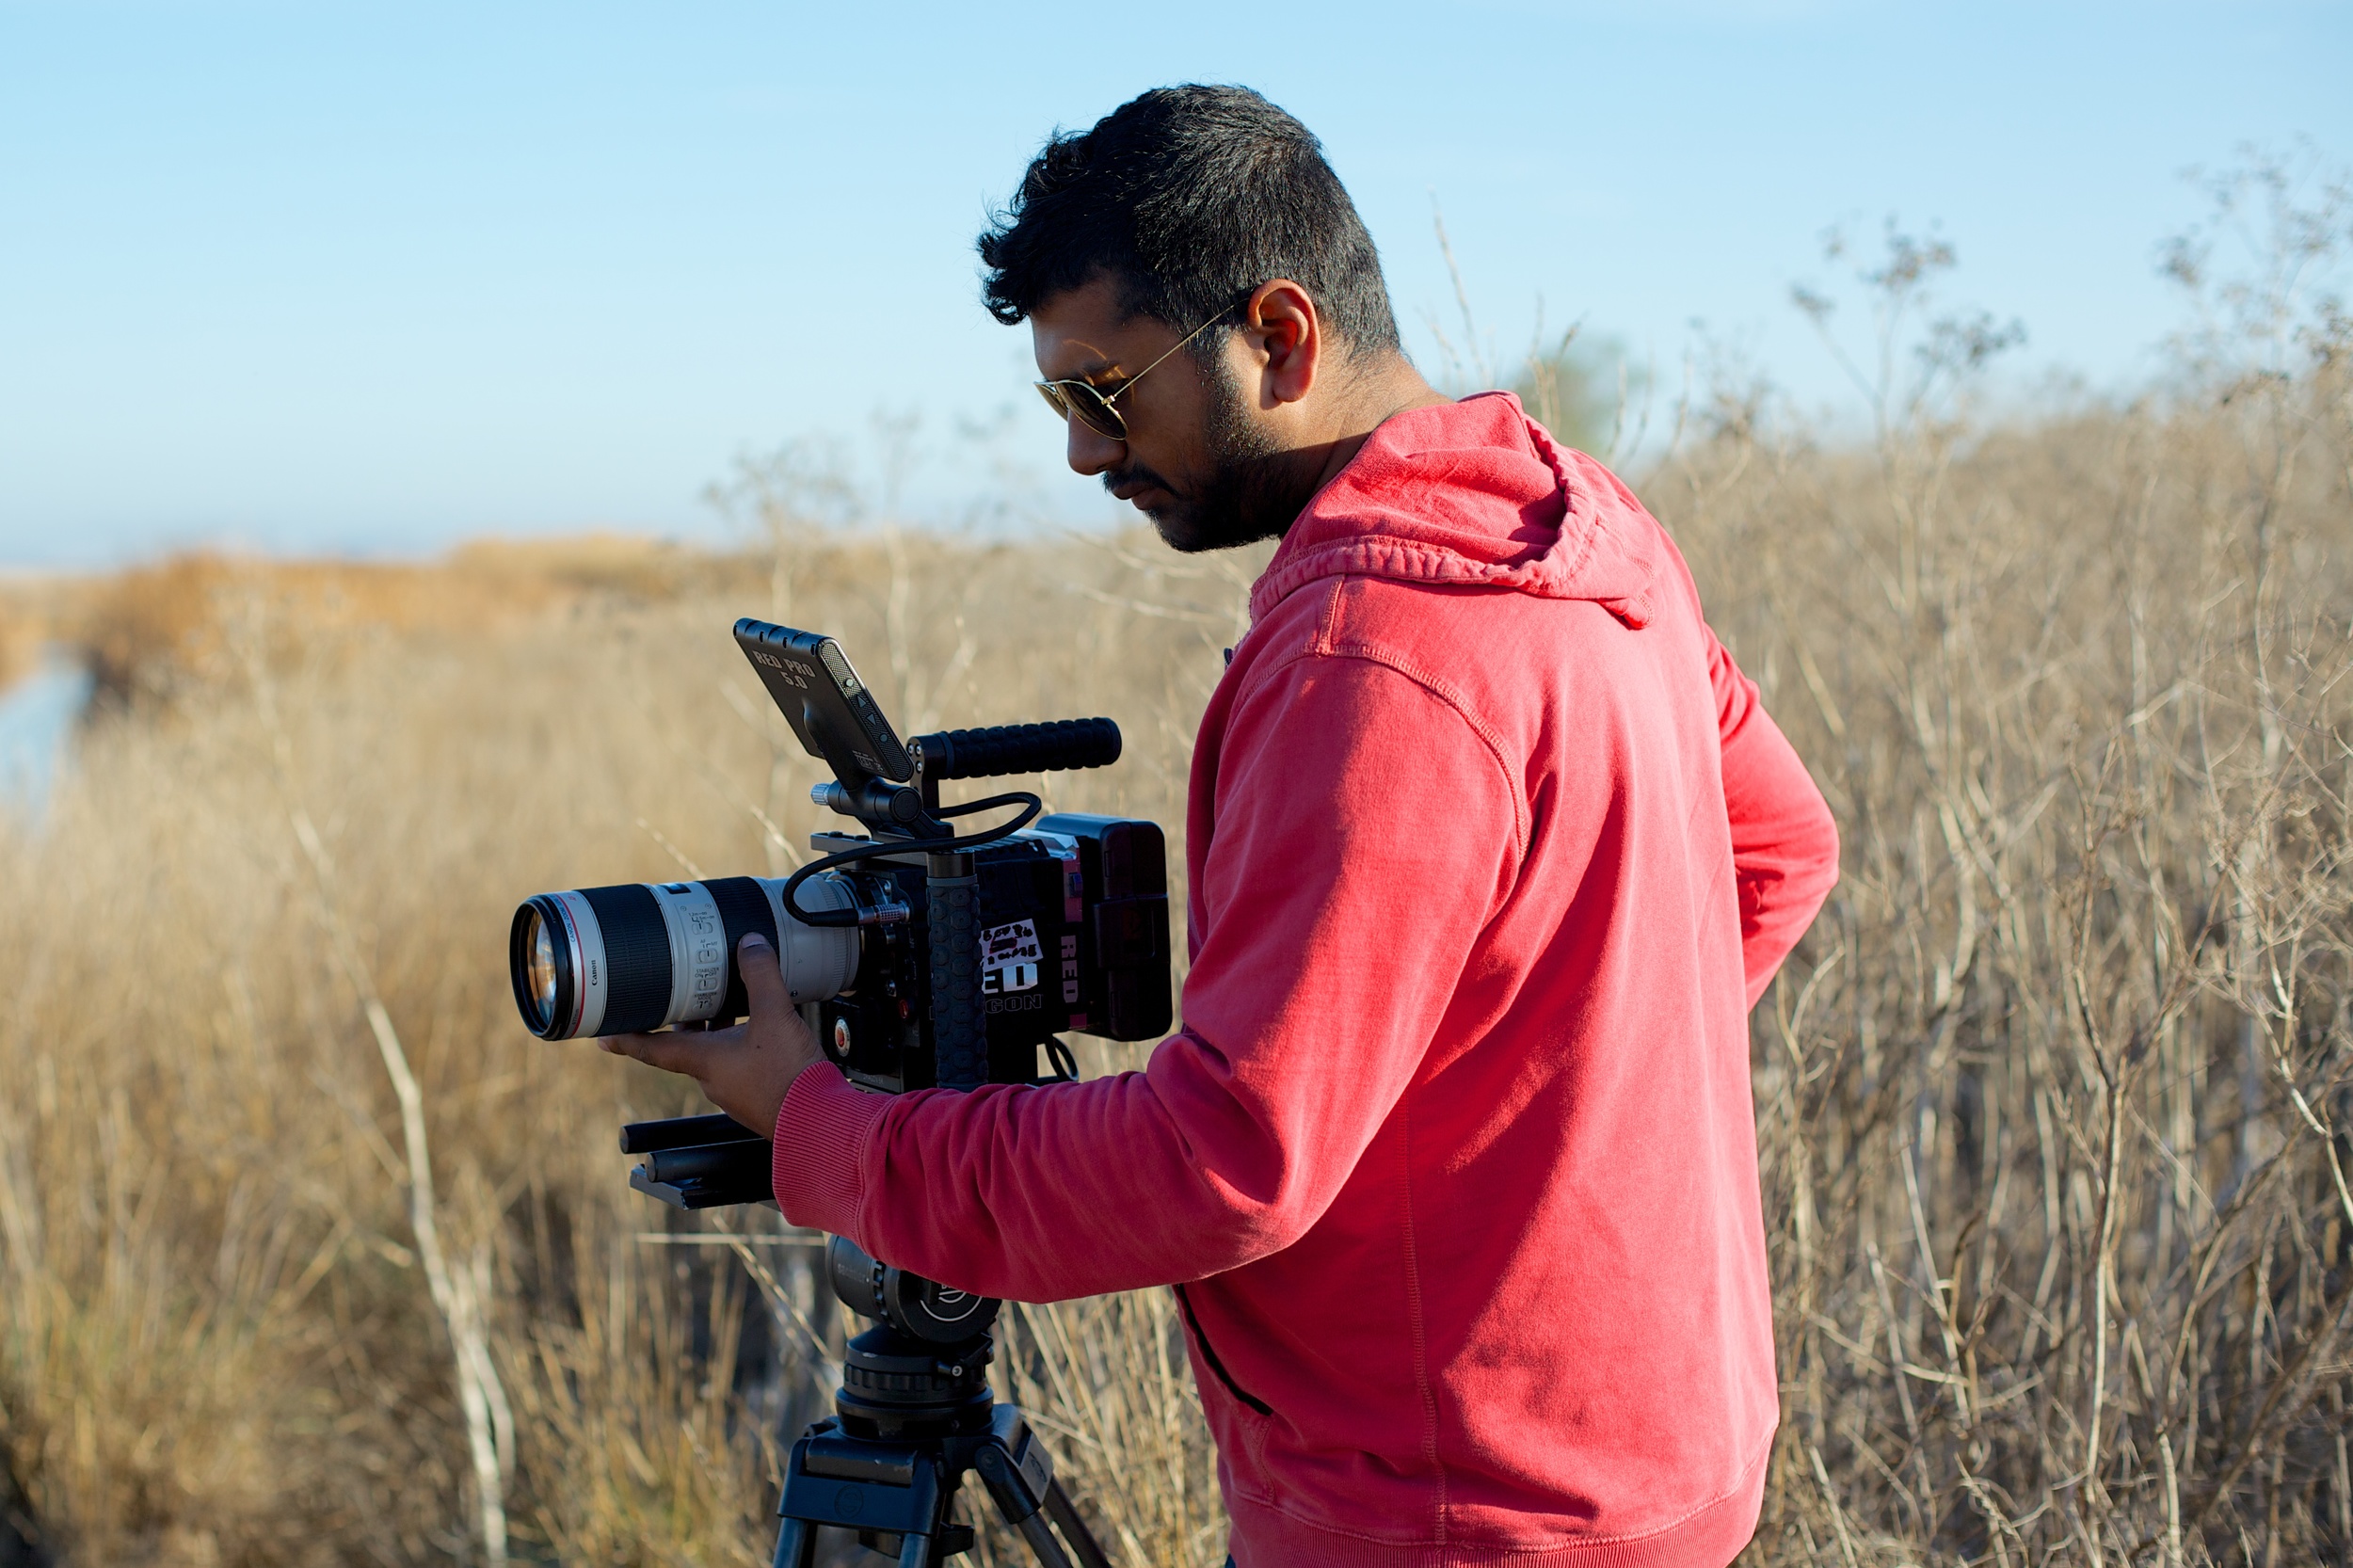  Dilip Isaac, Director of Photography 